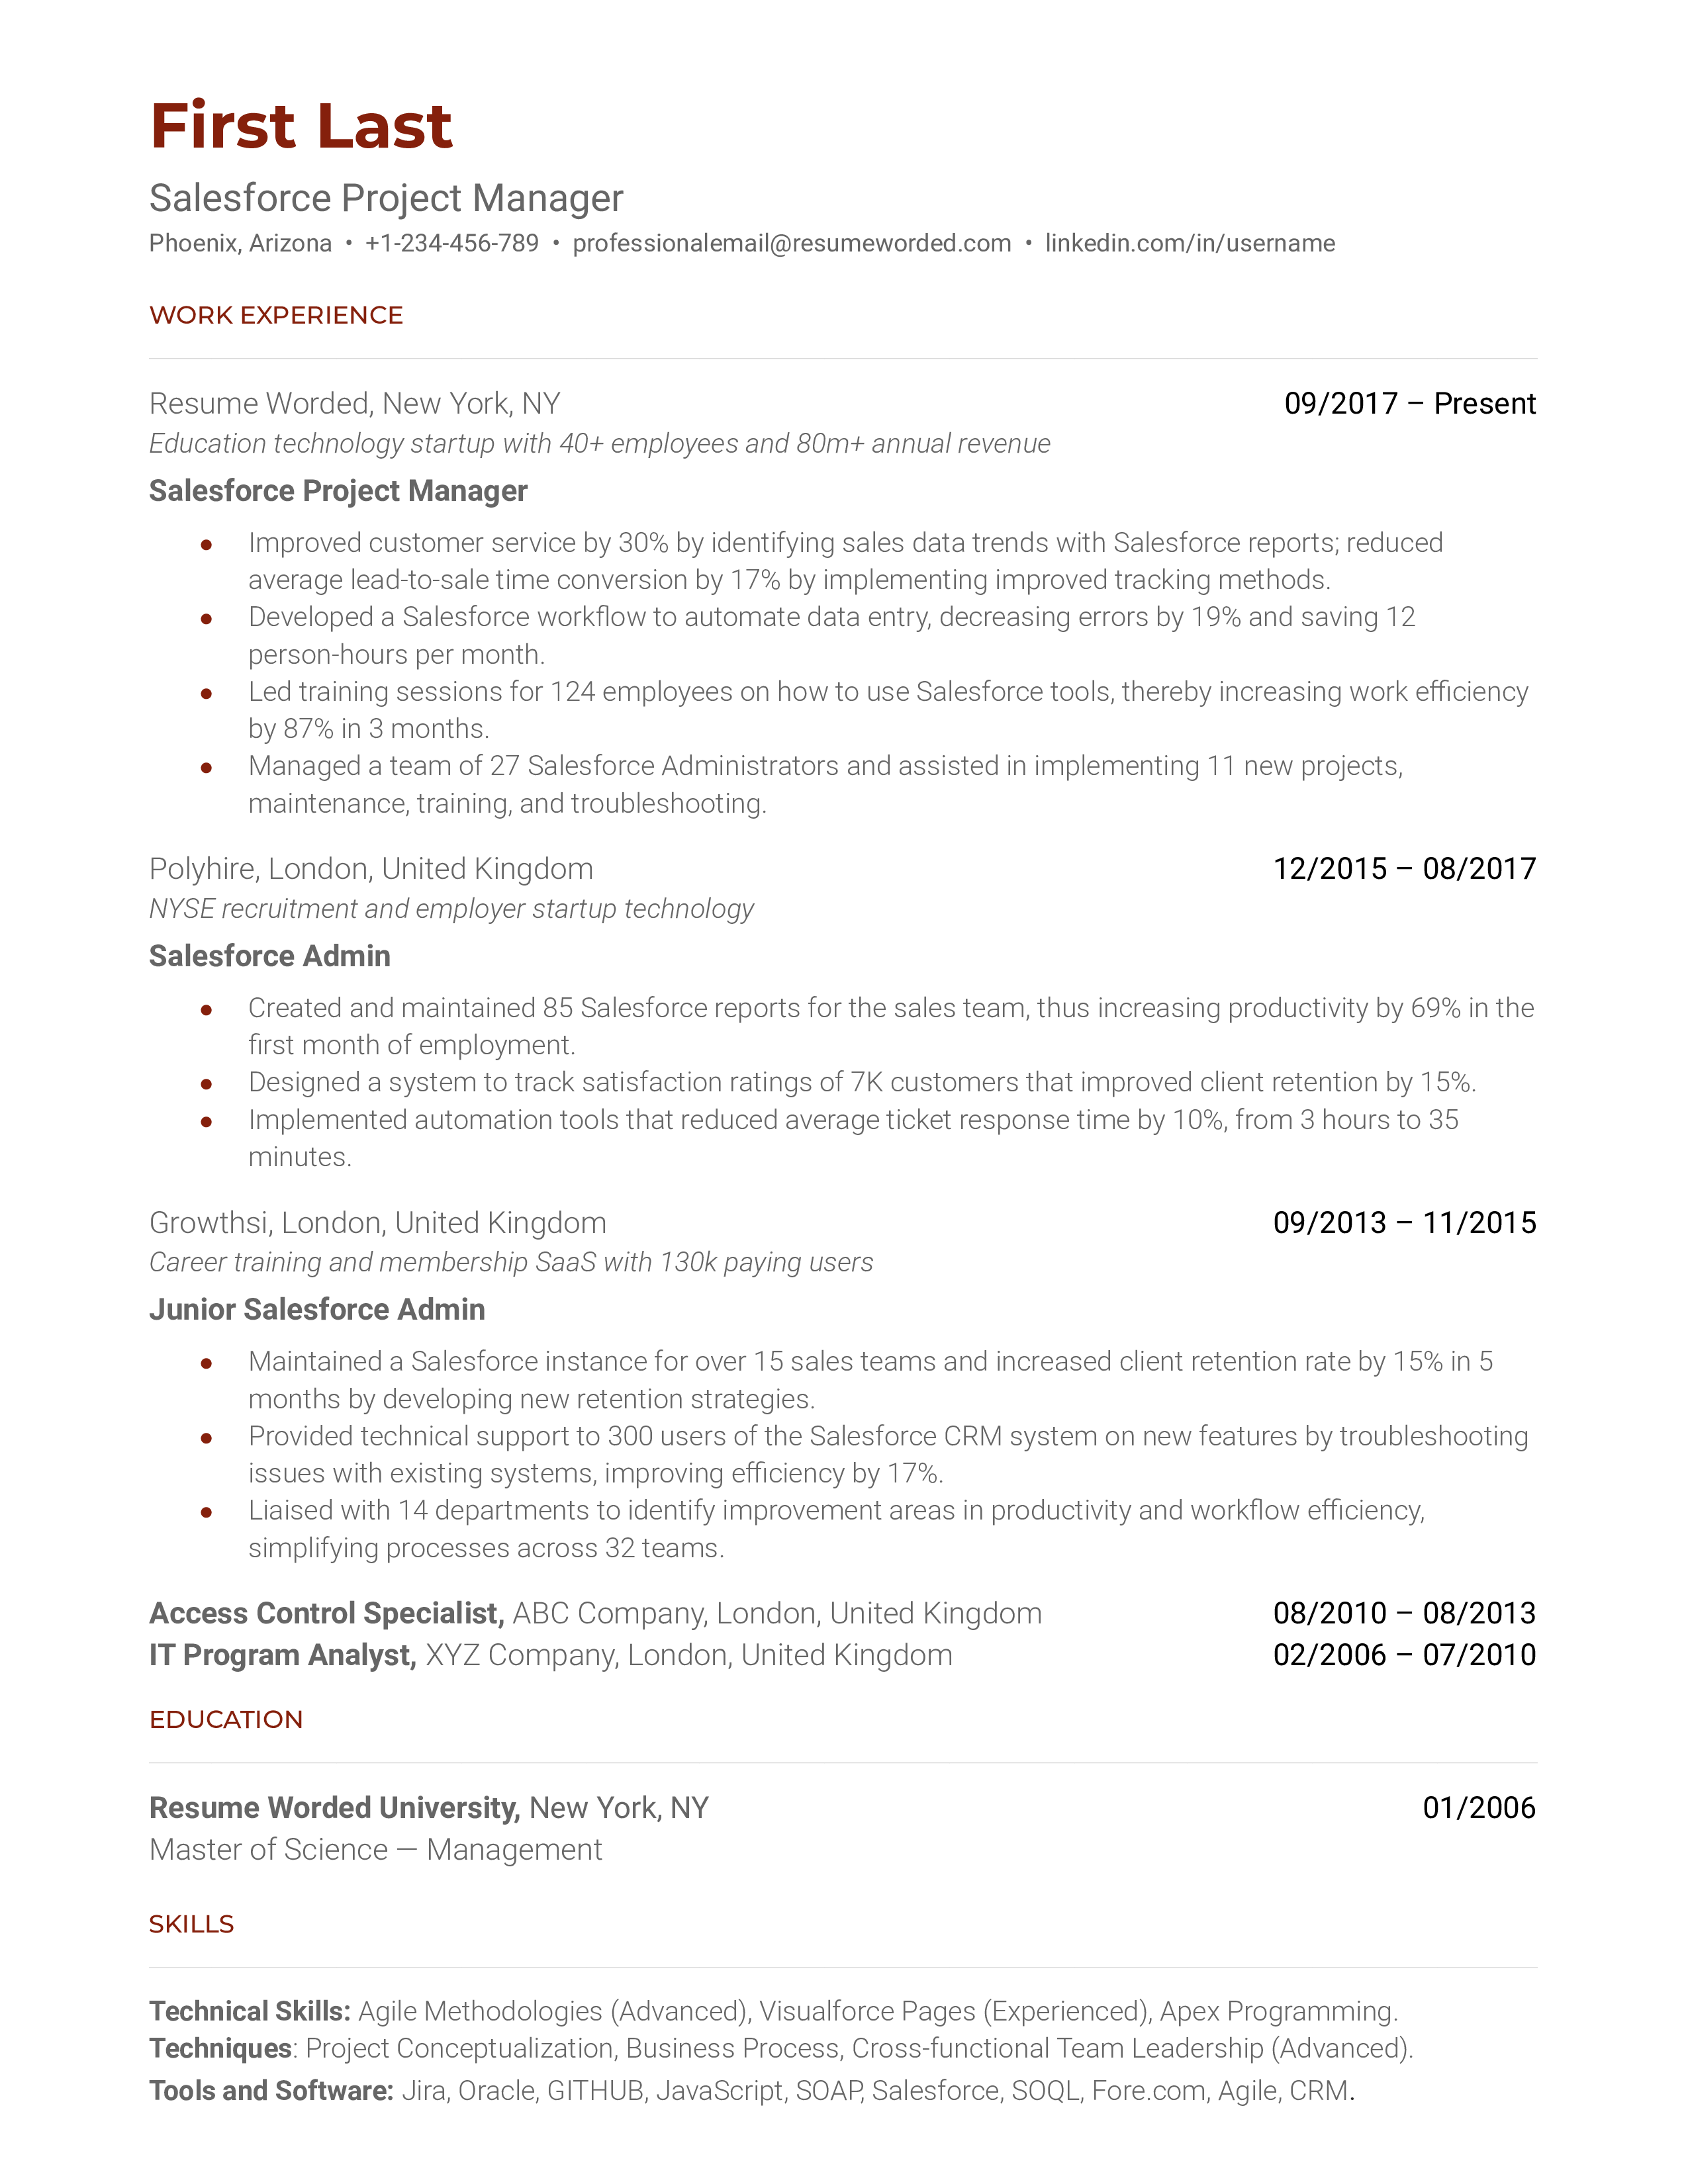 Salesforce Product Manager Resume Sample